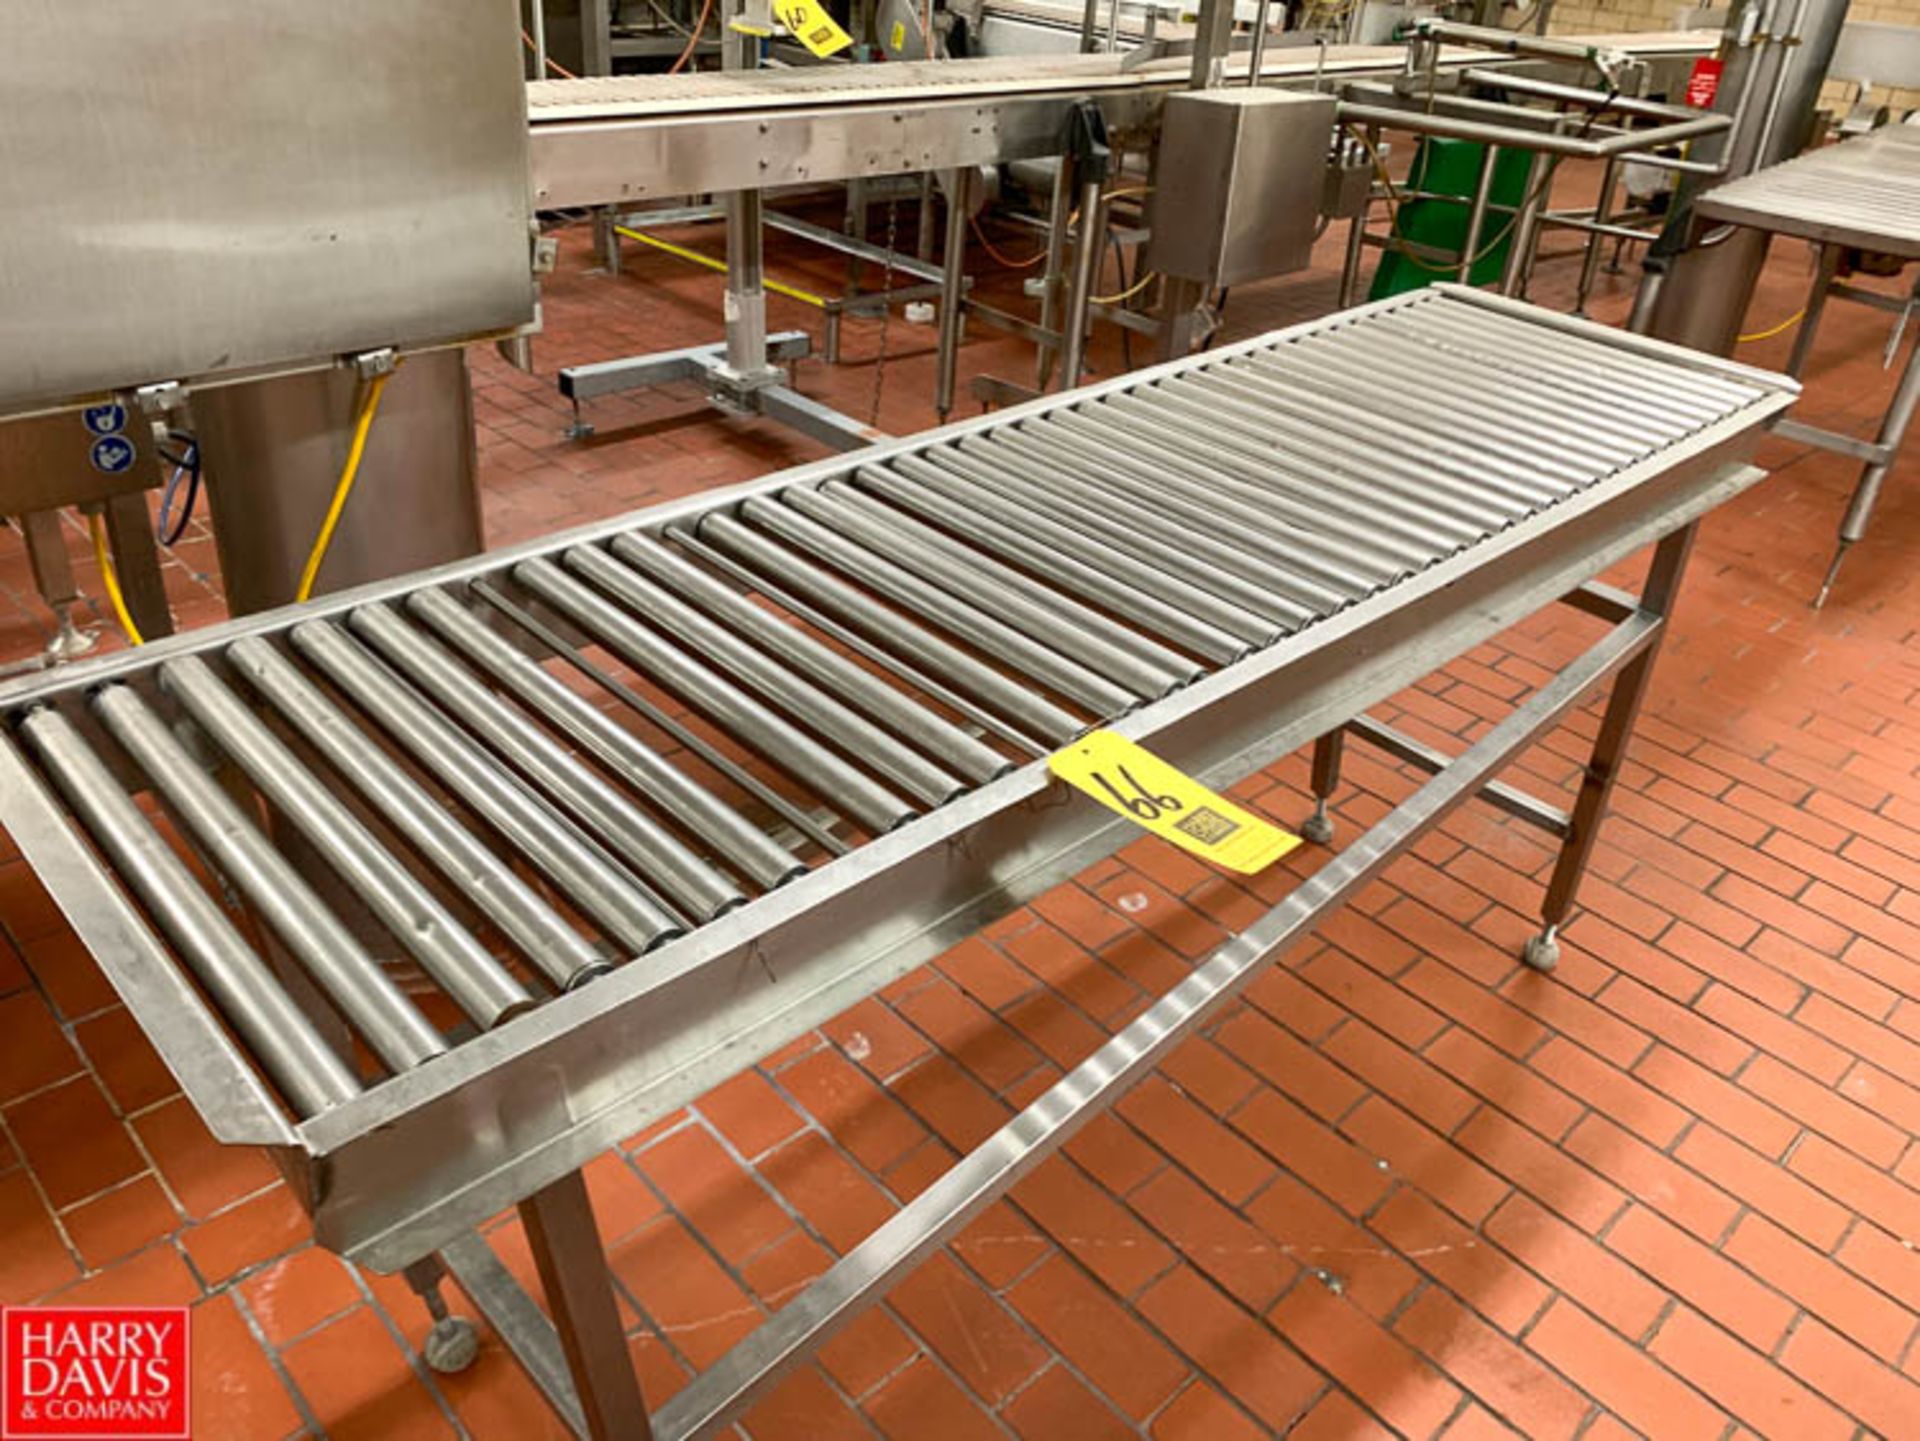 Section of S/S Frame Roller Conveyor Rigging Fee: $50 *LOCATED IN: Kiel, Wisconsin